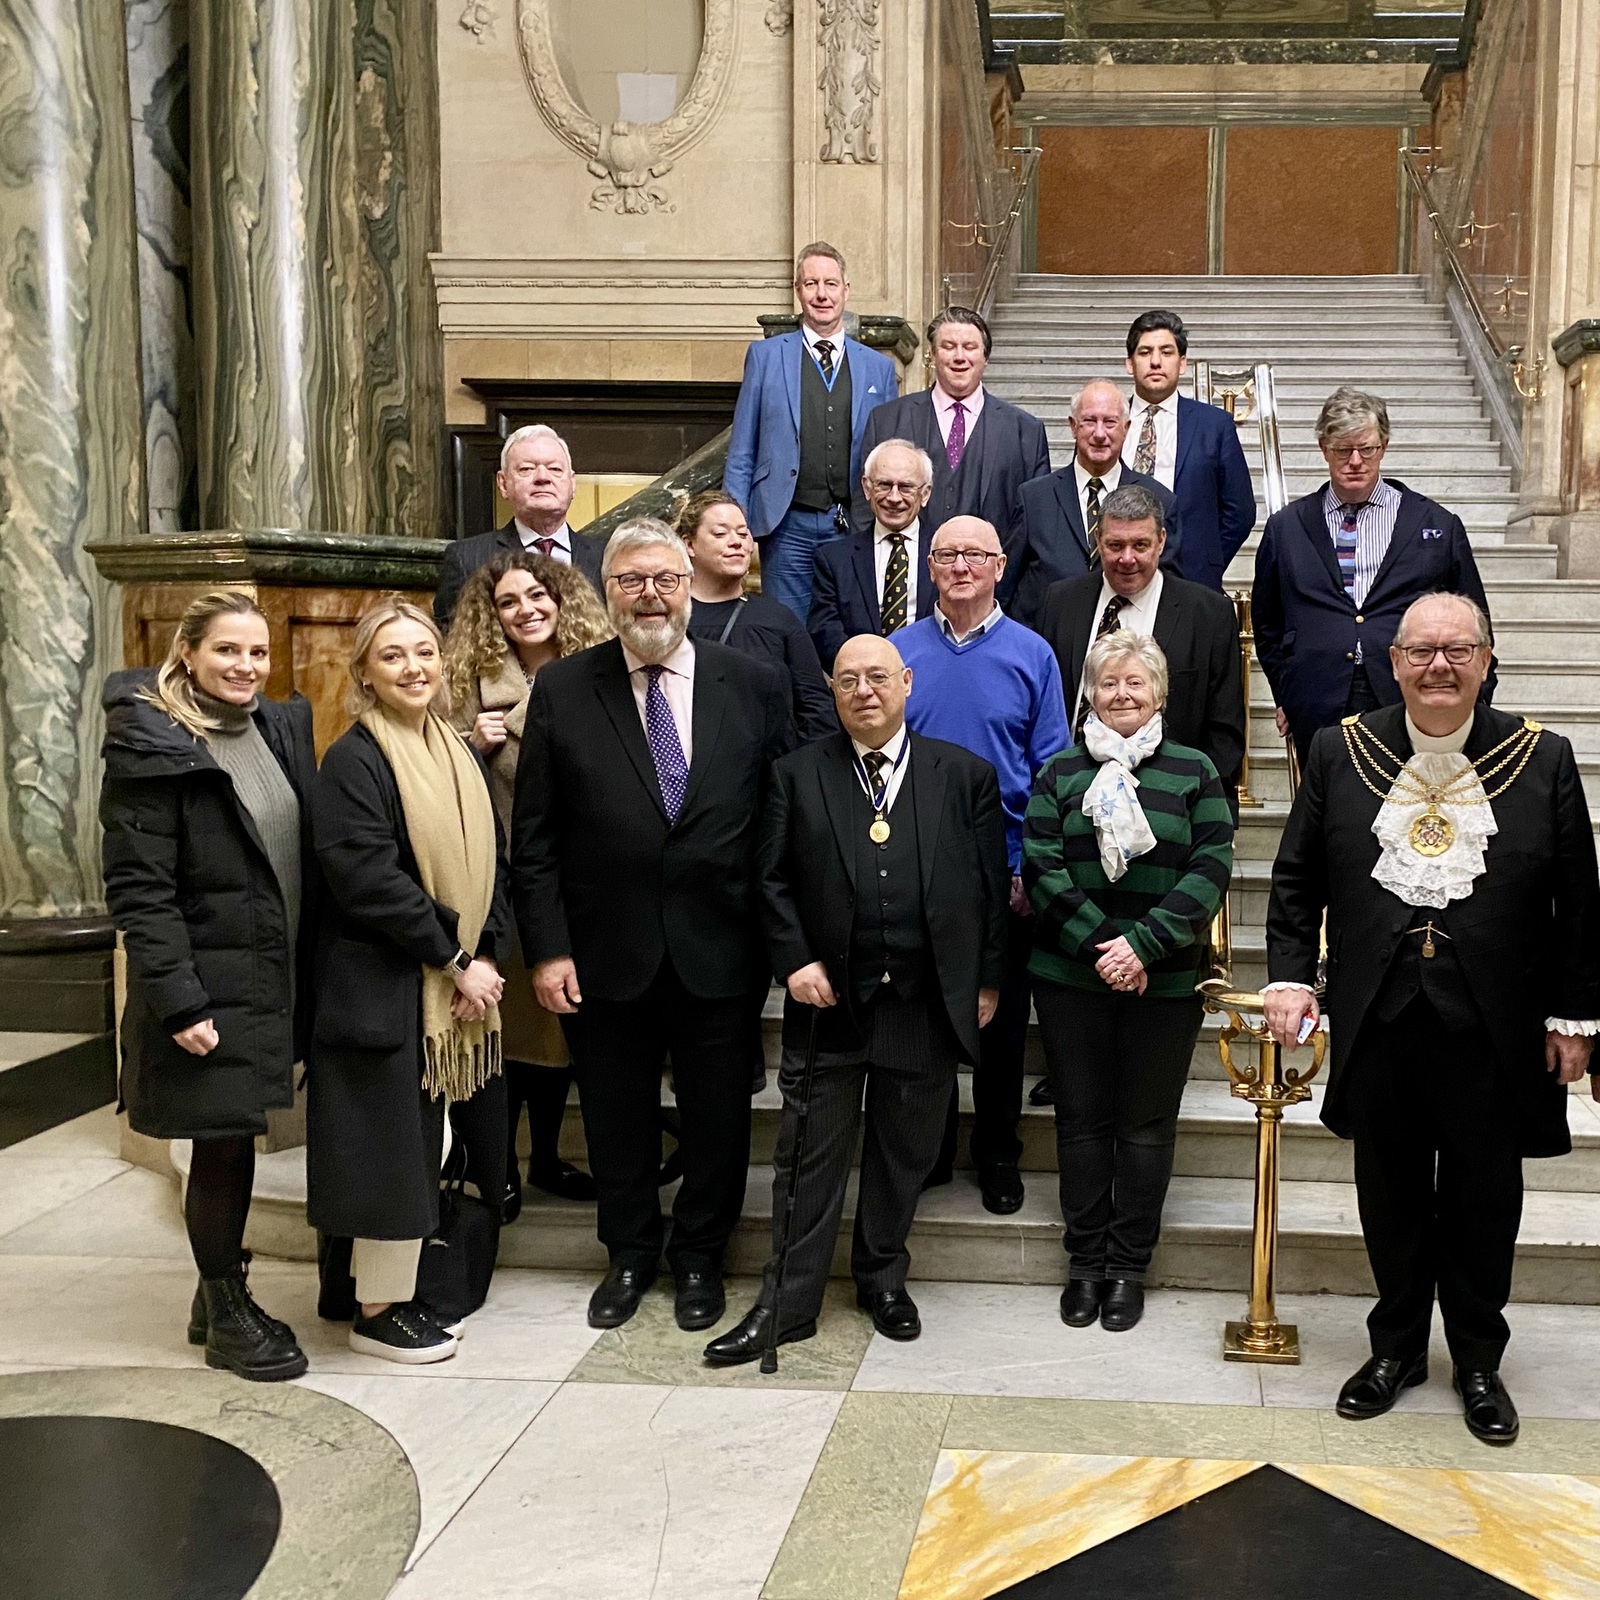 6 Mar 23 - Lovely to be able to give members of Farringdon Ward Club a tour of the wonderful Old Bailey.